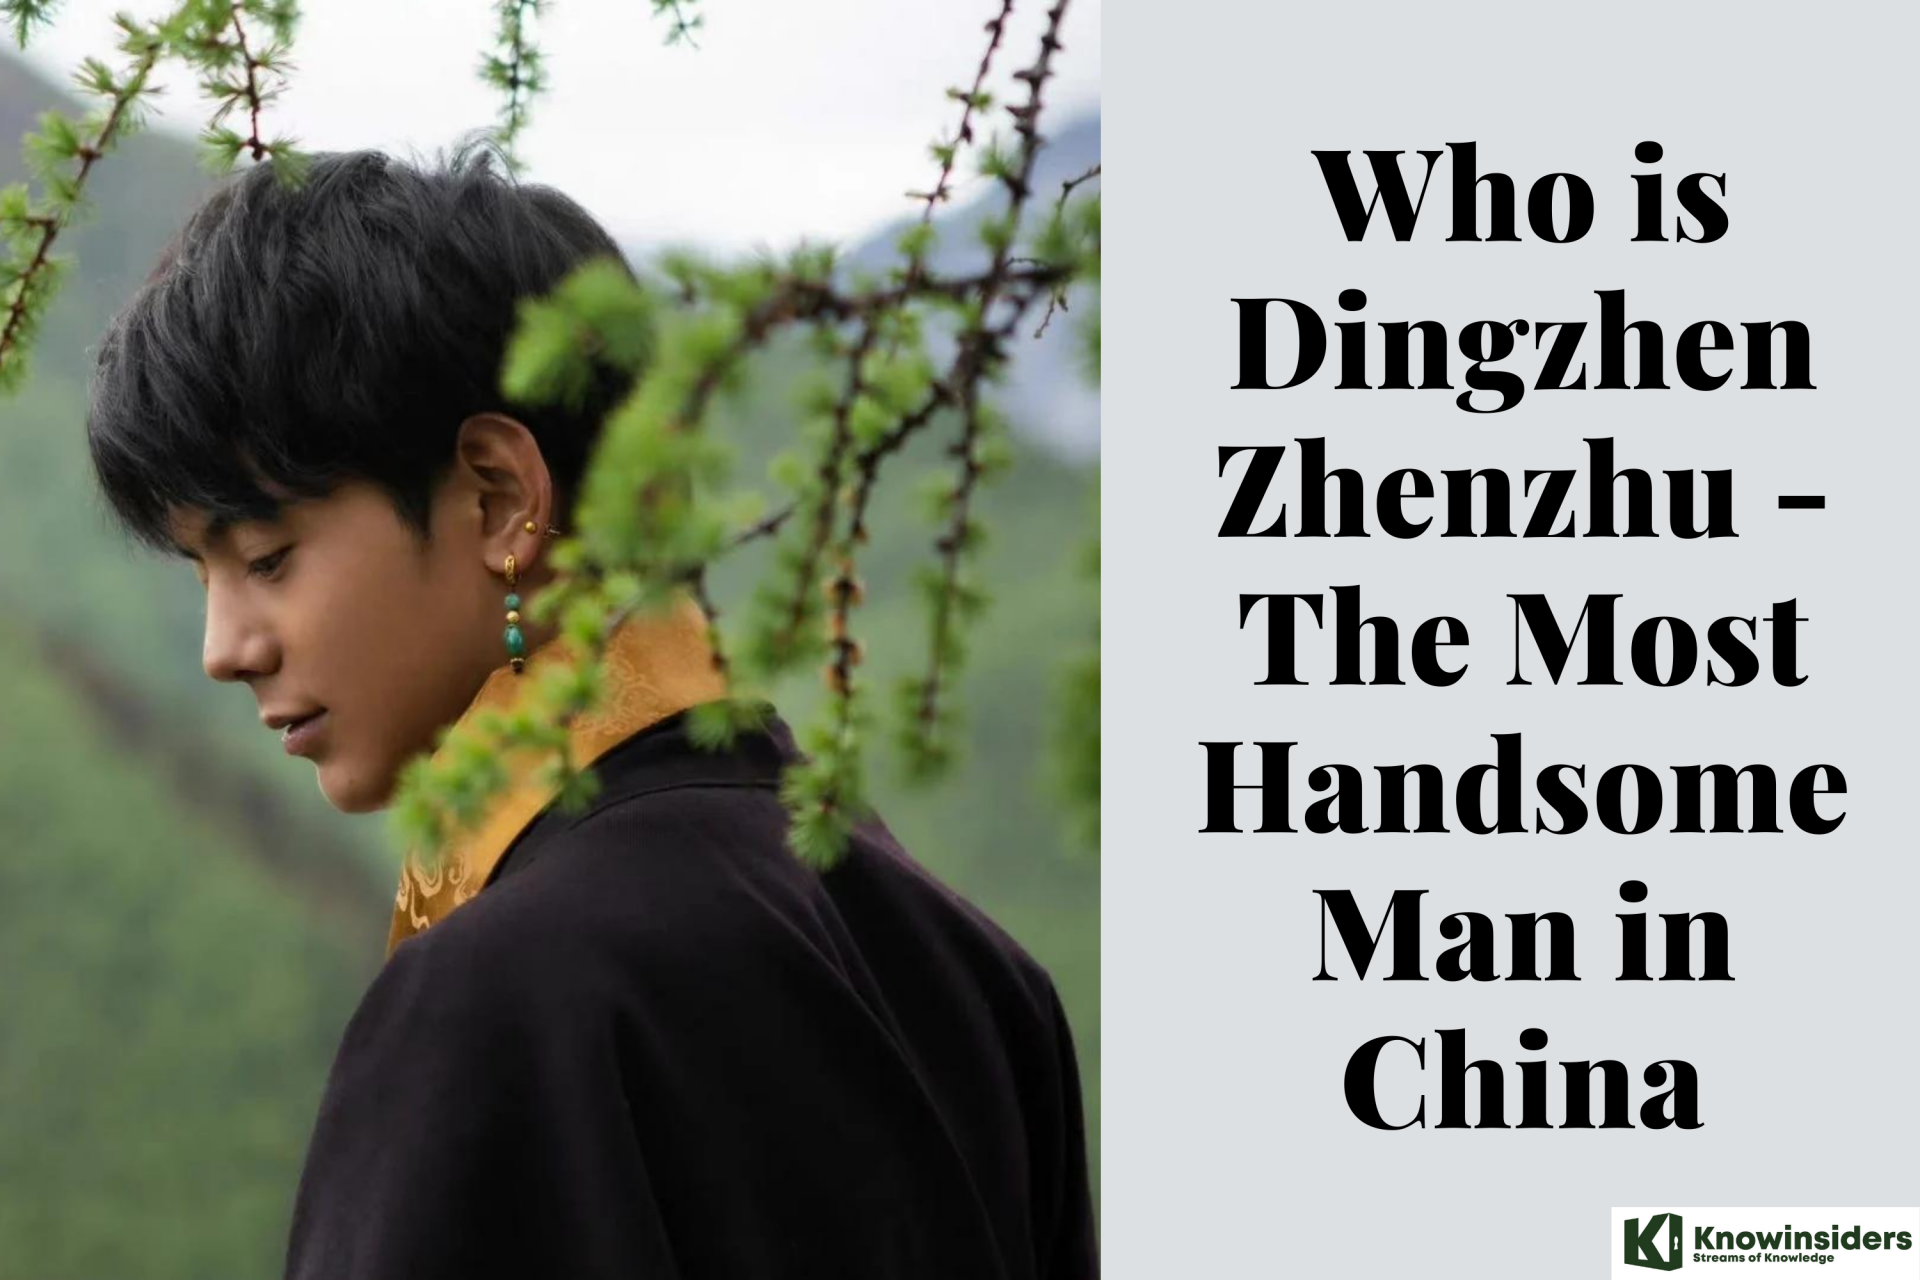 Who is Dingzhen Zhenzhu - The Most Handsome Man in China